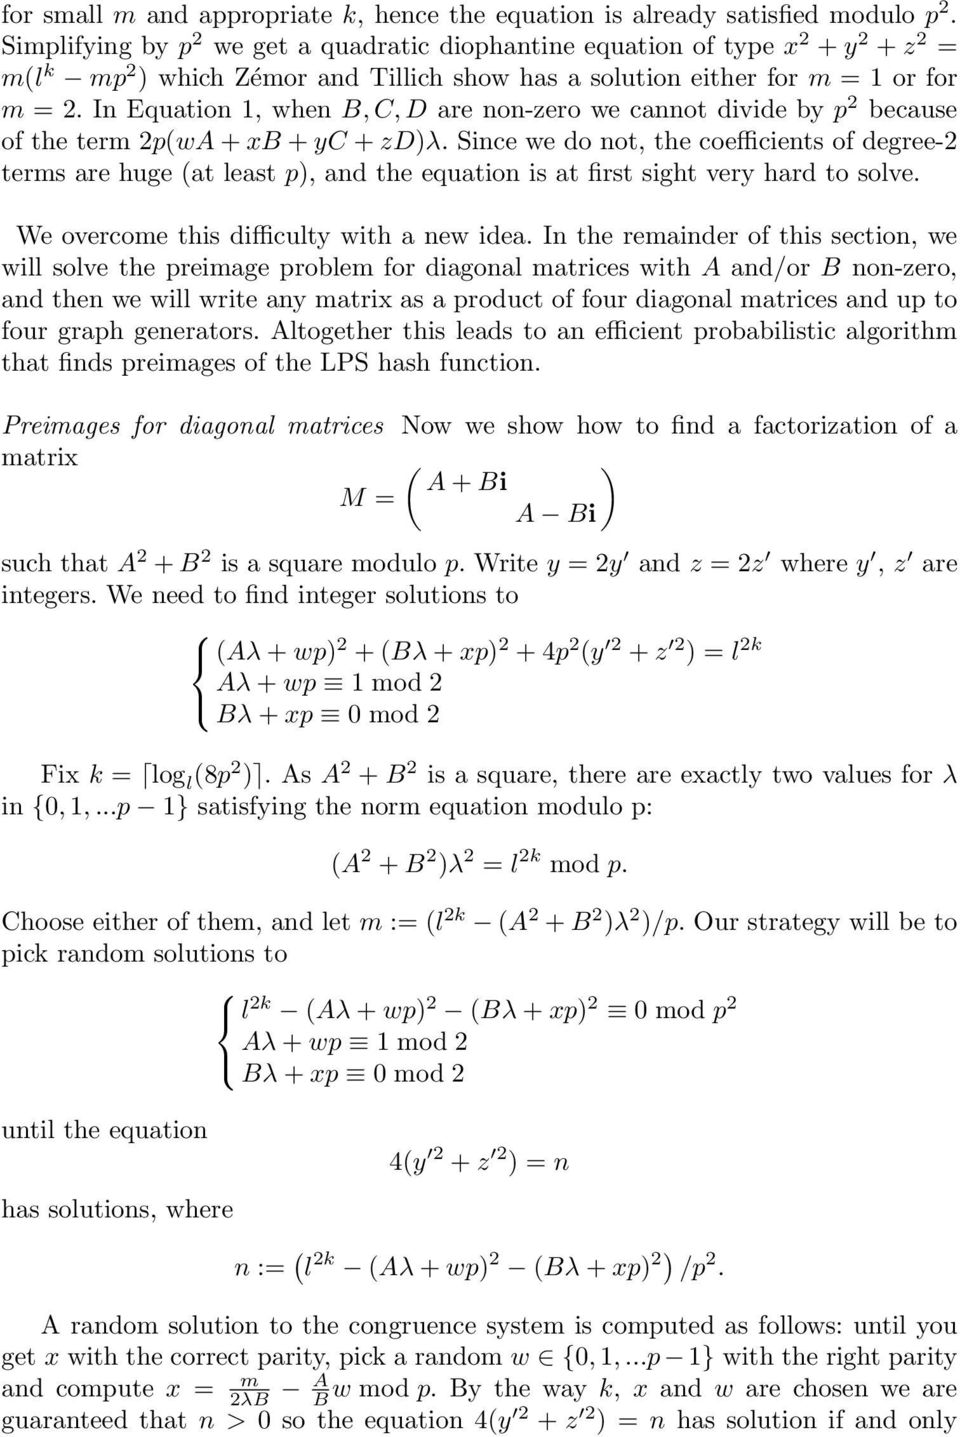 In Equation 1, when B, C, D are non-zero we cannot divide by p 2 because of the term 2p(wA + xb + yc + zd)λ.